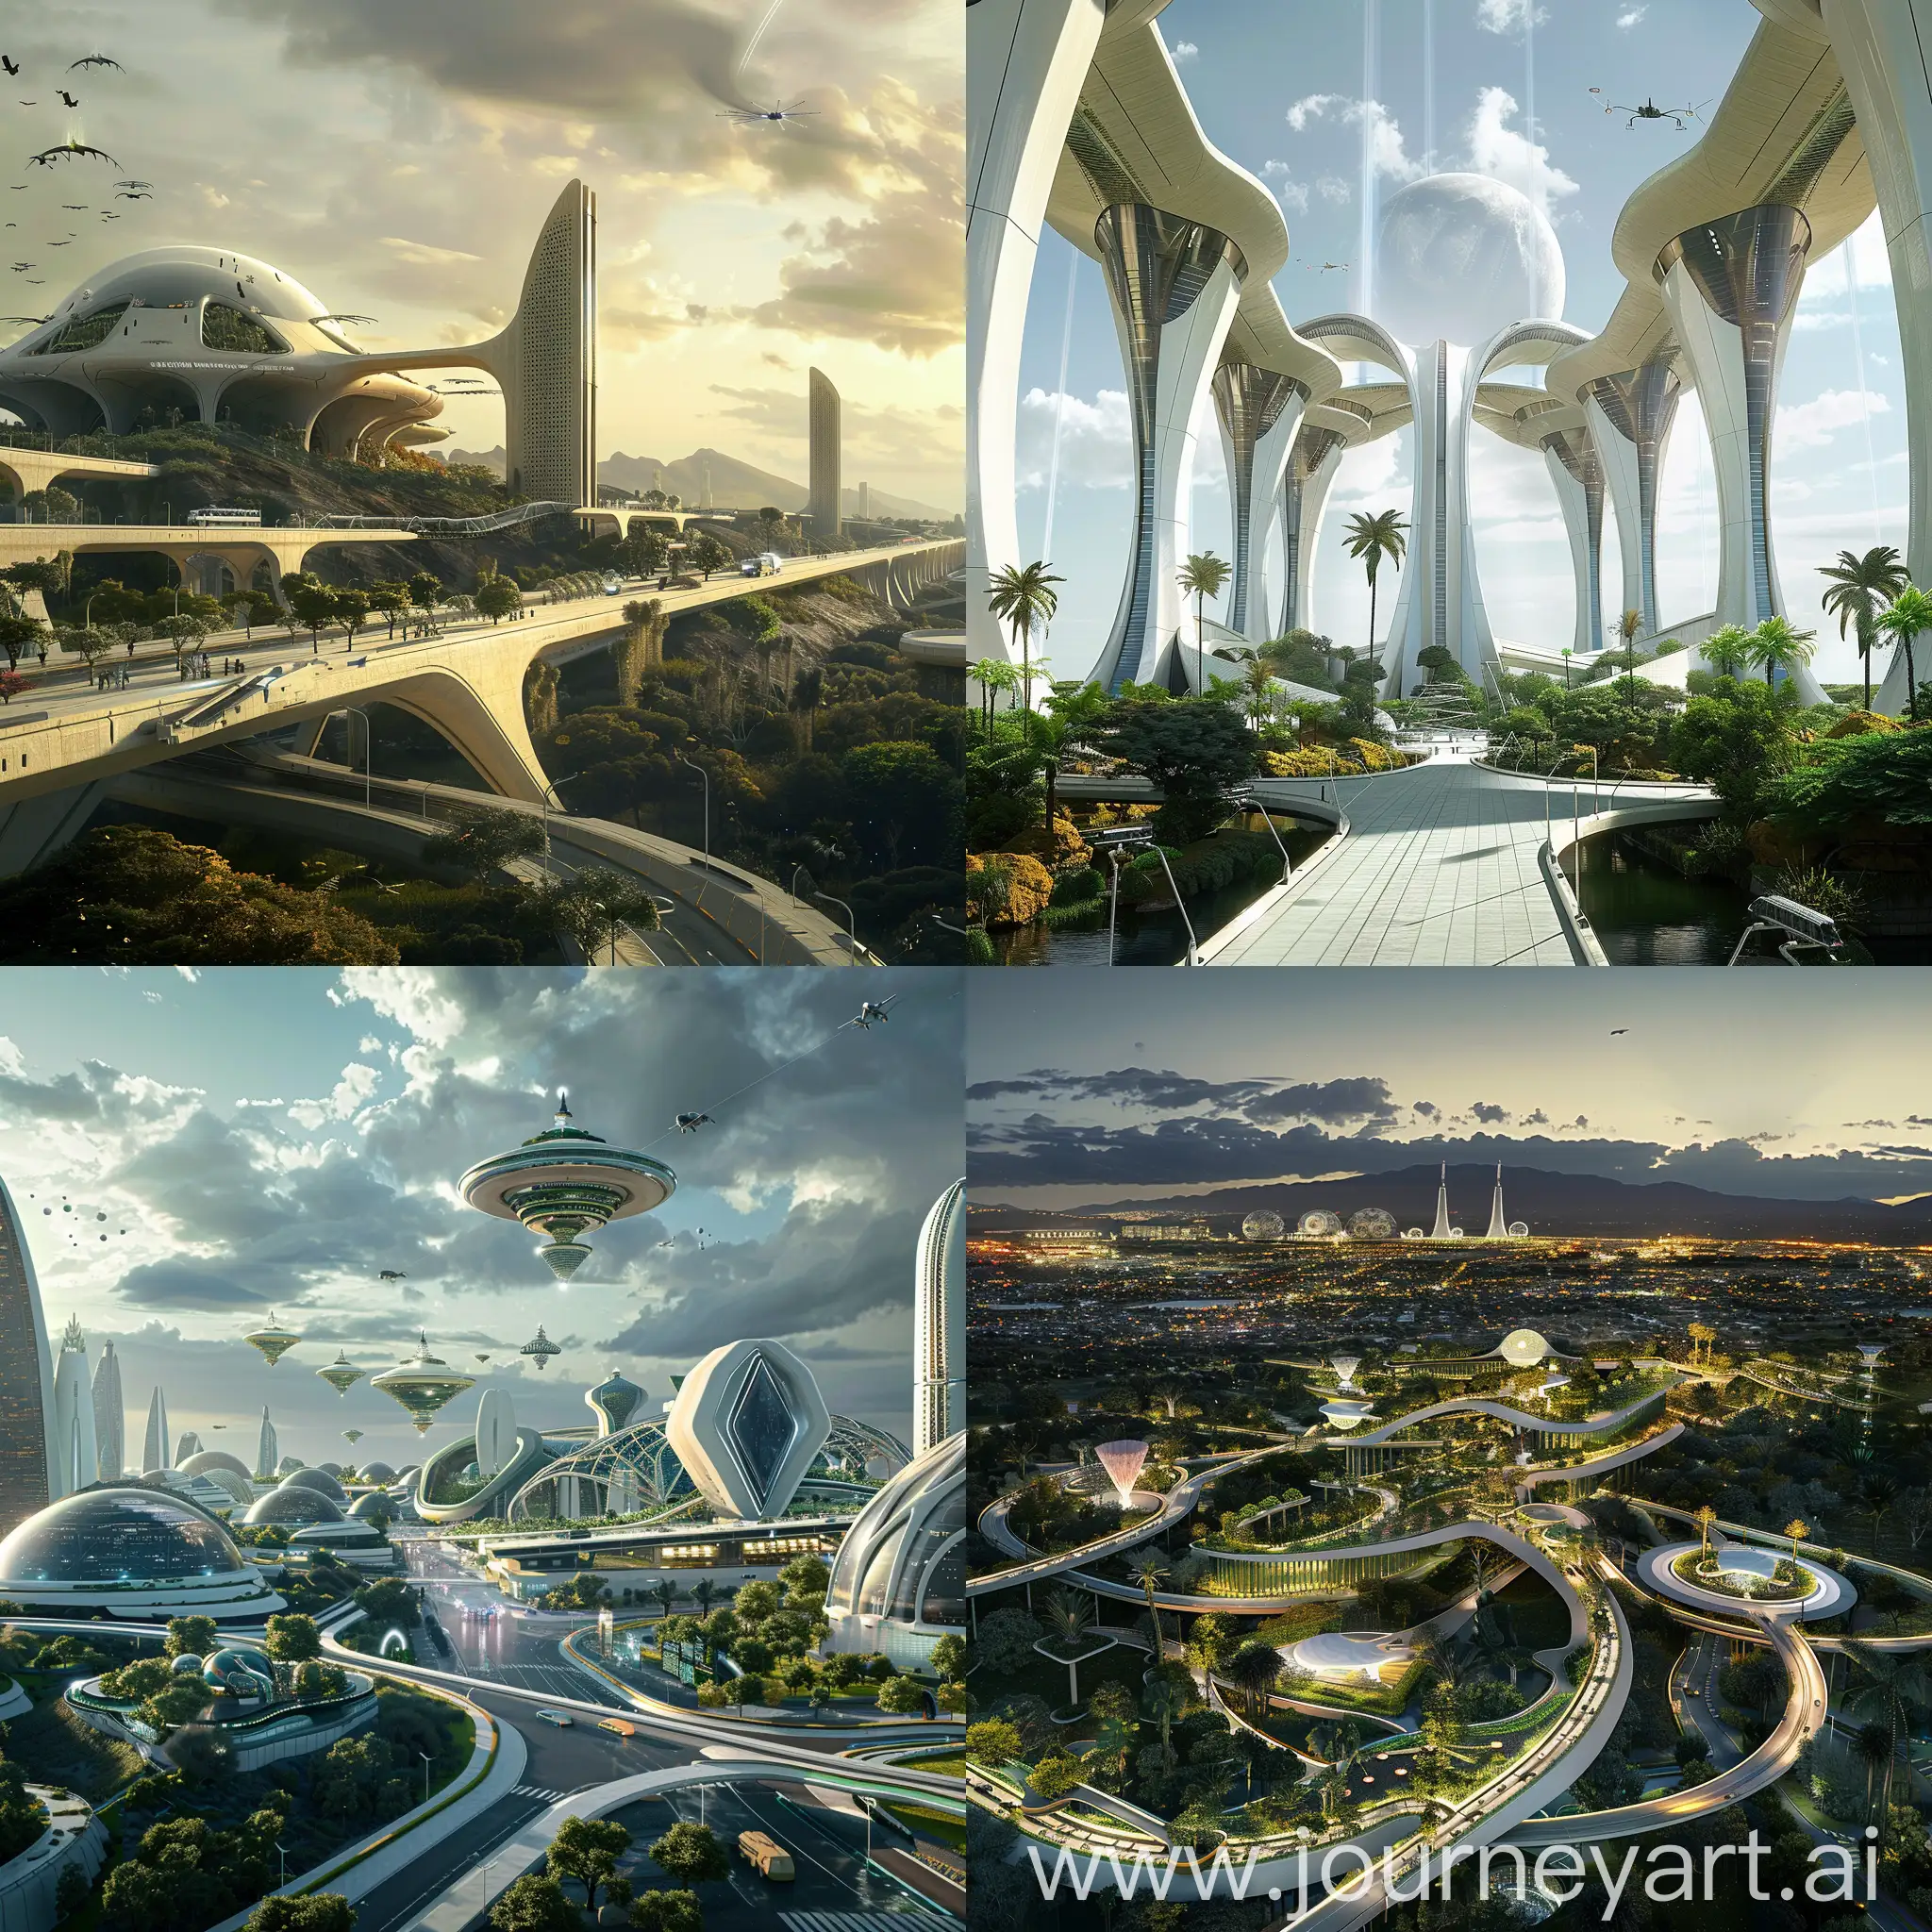 Sci-fi Brasilia, Advanced Science and Technology, Speculative Science and Technology, Self-Healing Concrete, Hyperloop Transit Systems, Drone Delivery Networks, Vertical Farms, Smart Windows, Atmospheric Water Generators, AI-Managed Traffic Grids, Robotic Maintenance Crews, Waste-to-Energy Plants, Quantum Computing Hubs, Nano-Material Construction, Augmented Reality Education Centers, Biometric Security Systems, Smart Health Clinics, Automated Public Services, Energy-Harvesting Pavements, Climate Control Dome, Magnetic Levitation Transport, Holographic Entertainment Venues, Cybernetic Wildlife Reserves, Aerodynamic Skyscrapers, Solar Canopies, Kinetic Facades, Eco-Bridges, Interactive Public Art, Holographic Signage, Responsive Streetlights, Urban Forests, Water Purification Fountains, Geothermal Heating Grids, Floating Gardens, Dynamic Sculptures, Light-Absorbing Pavements, Atmospheric Skyparks, Wind Turbine Trees, Smart Billboards, Architectural Drones, Lunar Power Stations, Anti-Smog Towers, Space Elevator Complex, In Unreal Engine 5 Style --stylize 1000